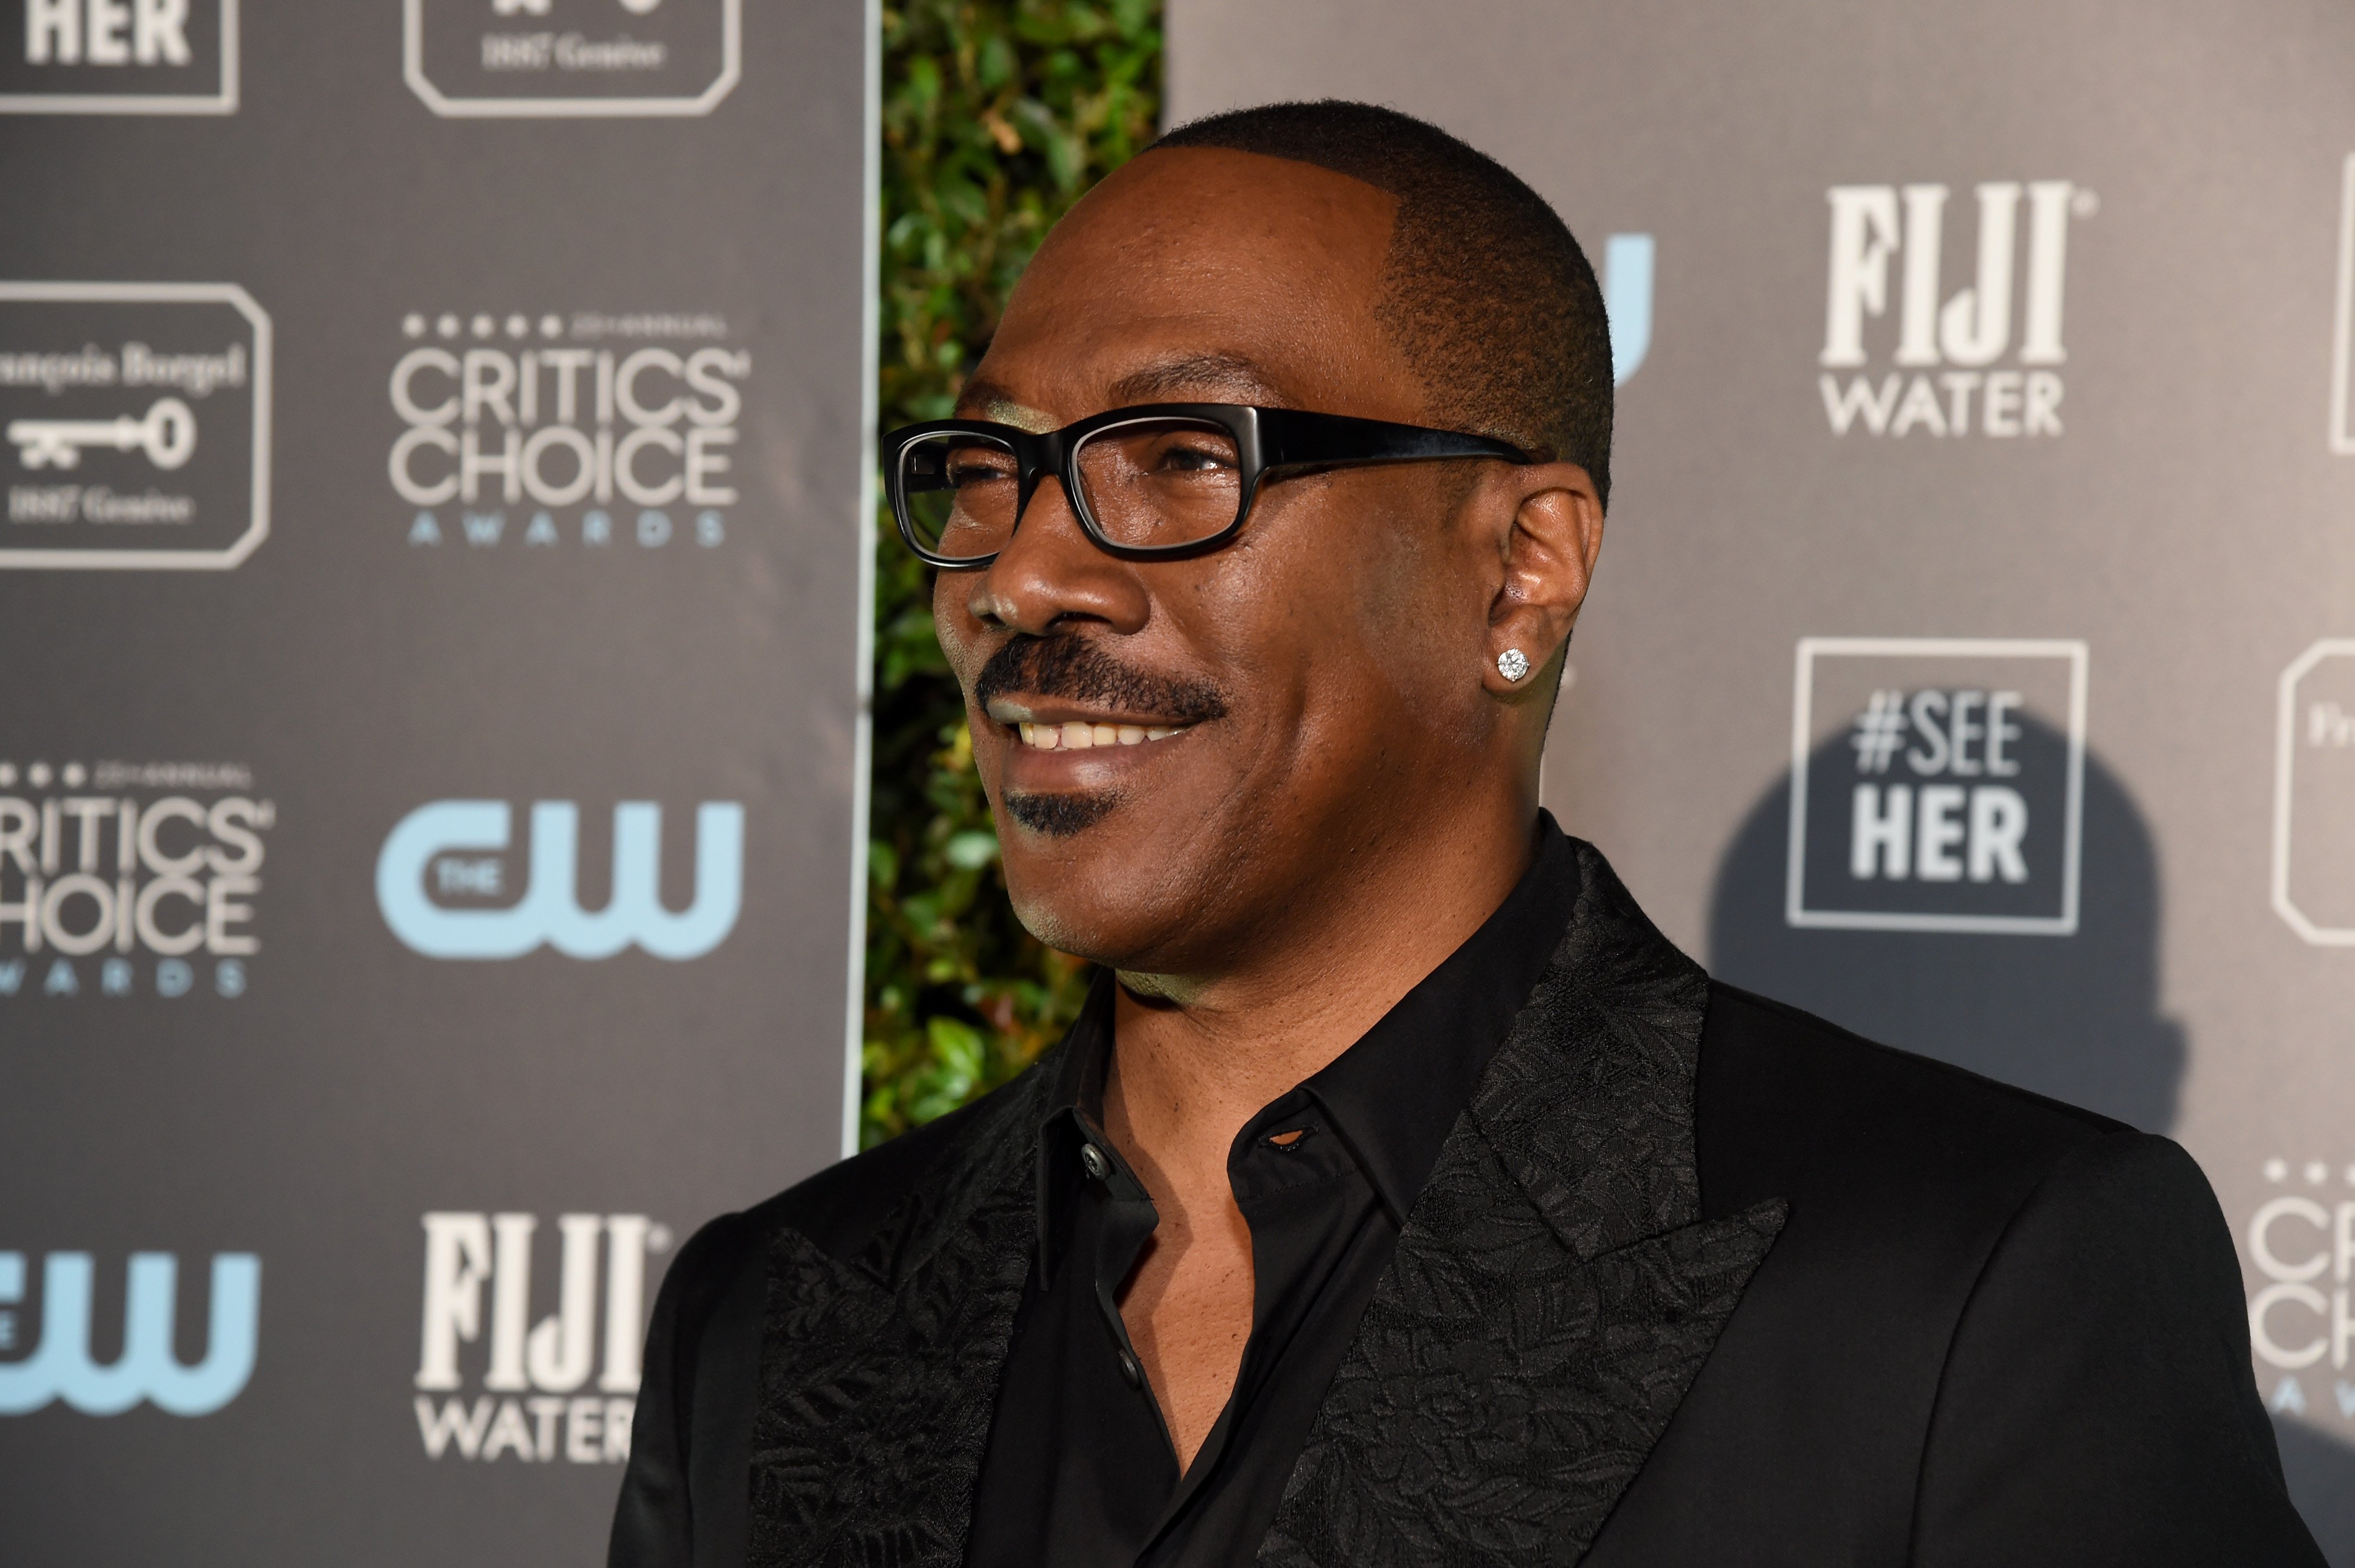 Eddie Murphy at the Critics' Choice Awards on January 12, 2020 in Santa Monica, California. | Photo: Getty Images